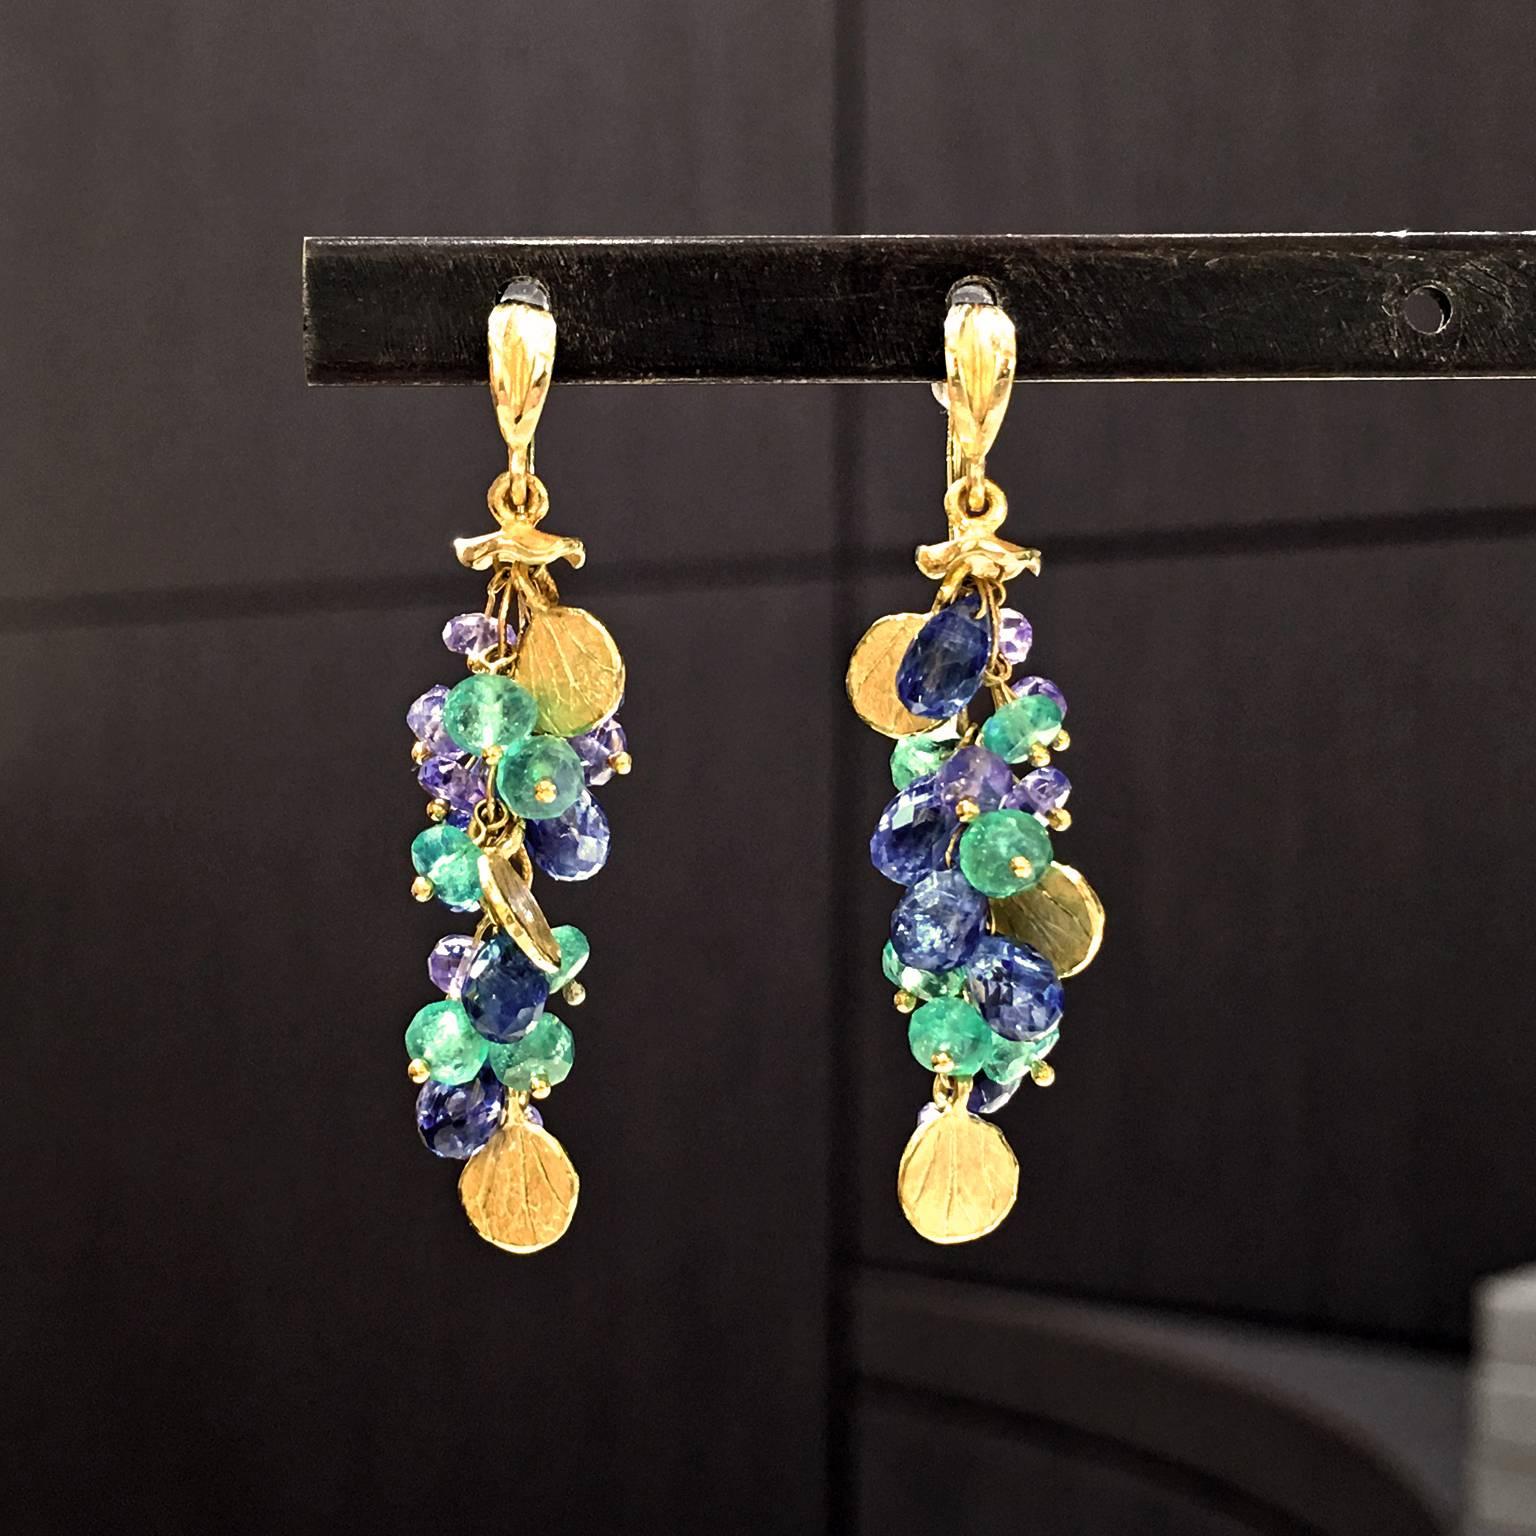 Green Violet and Blue Briolette Drop Earrings handcrafted by renowned jewelry artist Barbara Heinrich in her signature matte-finished 18k yellow gold with 3.04 carats of emerald briolettes, 2.28 carats of tanzanite briolettes, and 7.74 carats of